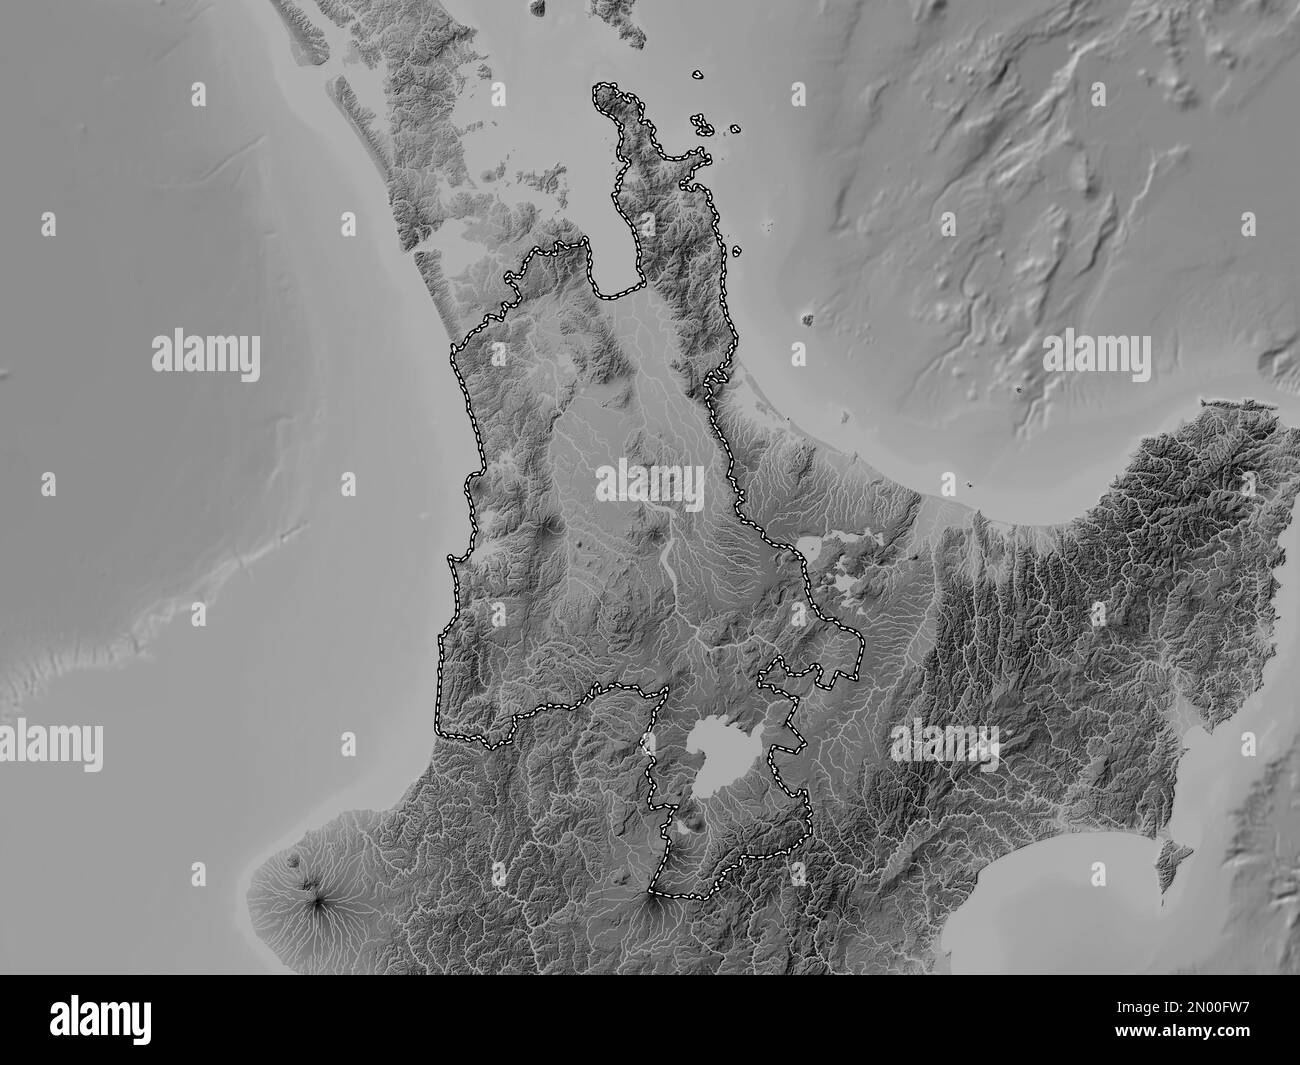 Waikato, regional council of New Zealand. Grayscale elevation map with lakes and rivers Stock Photo